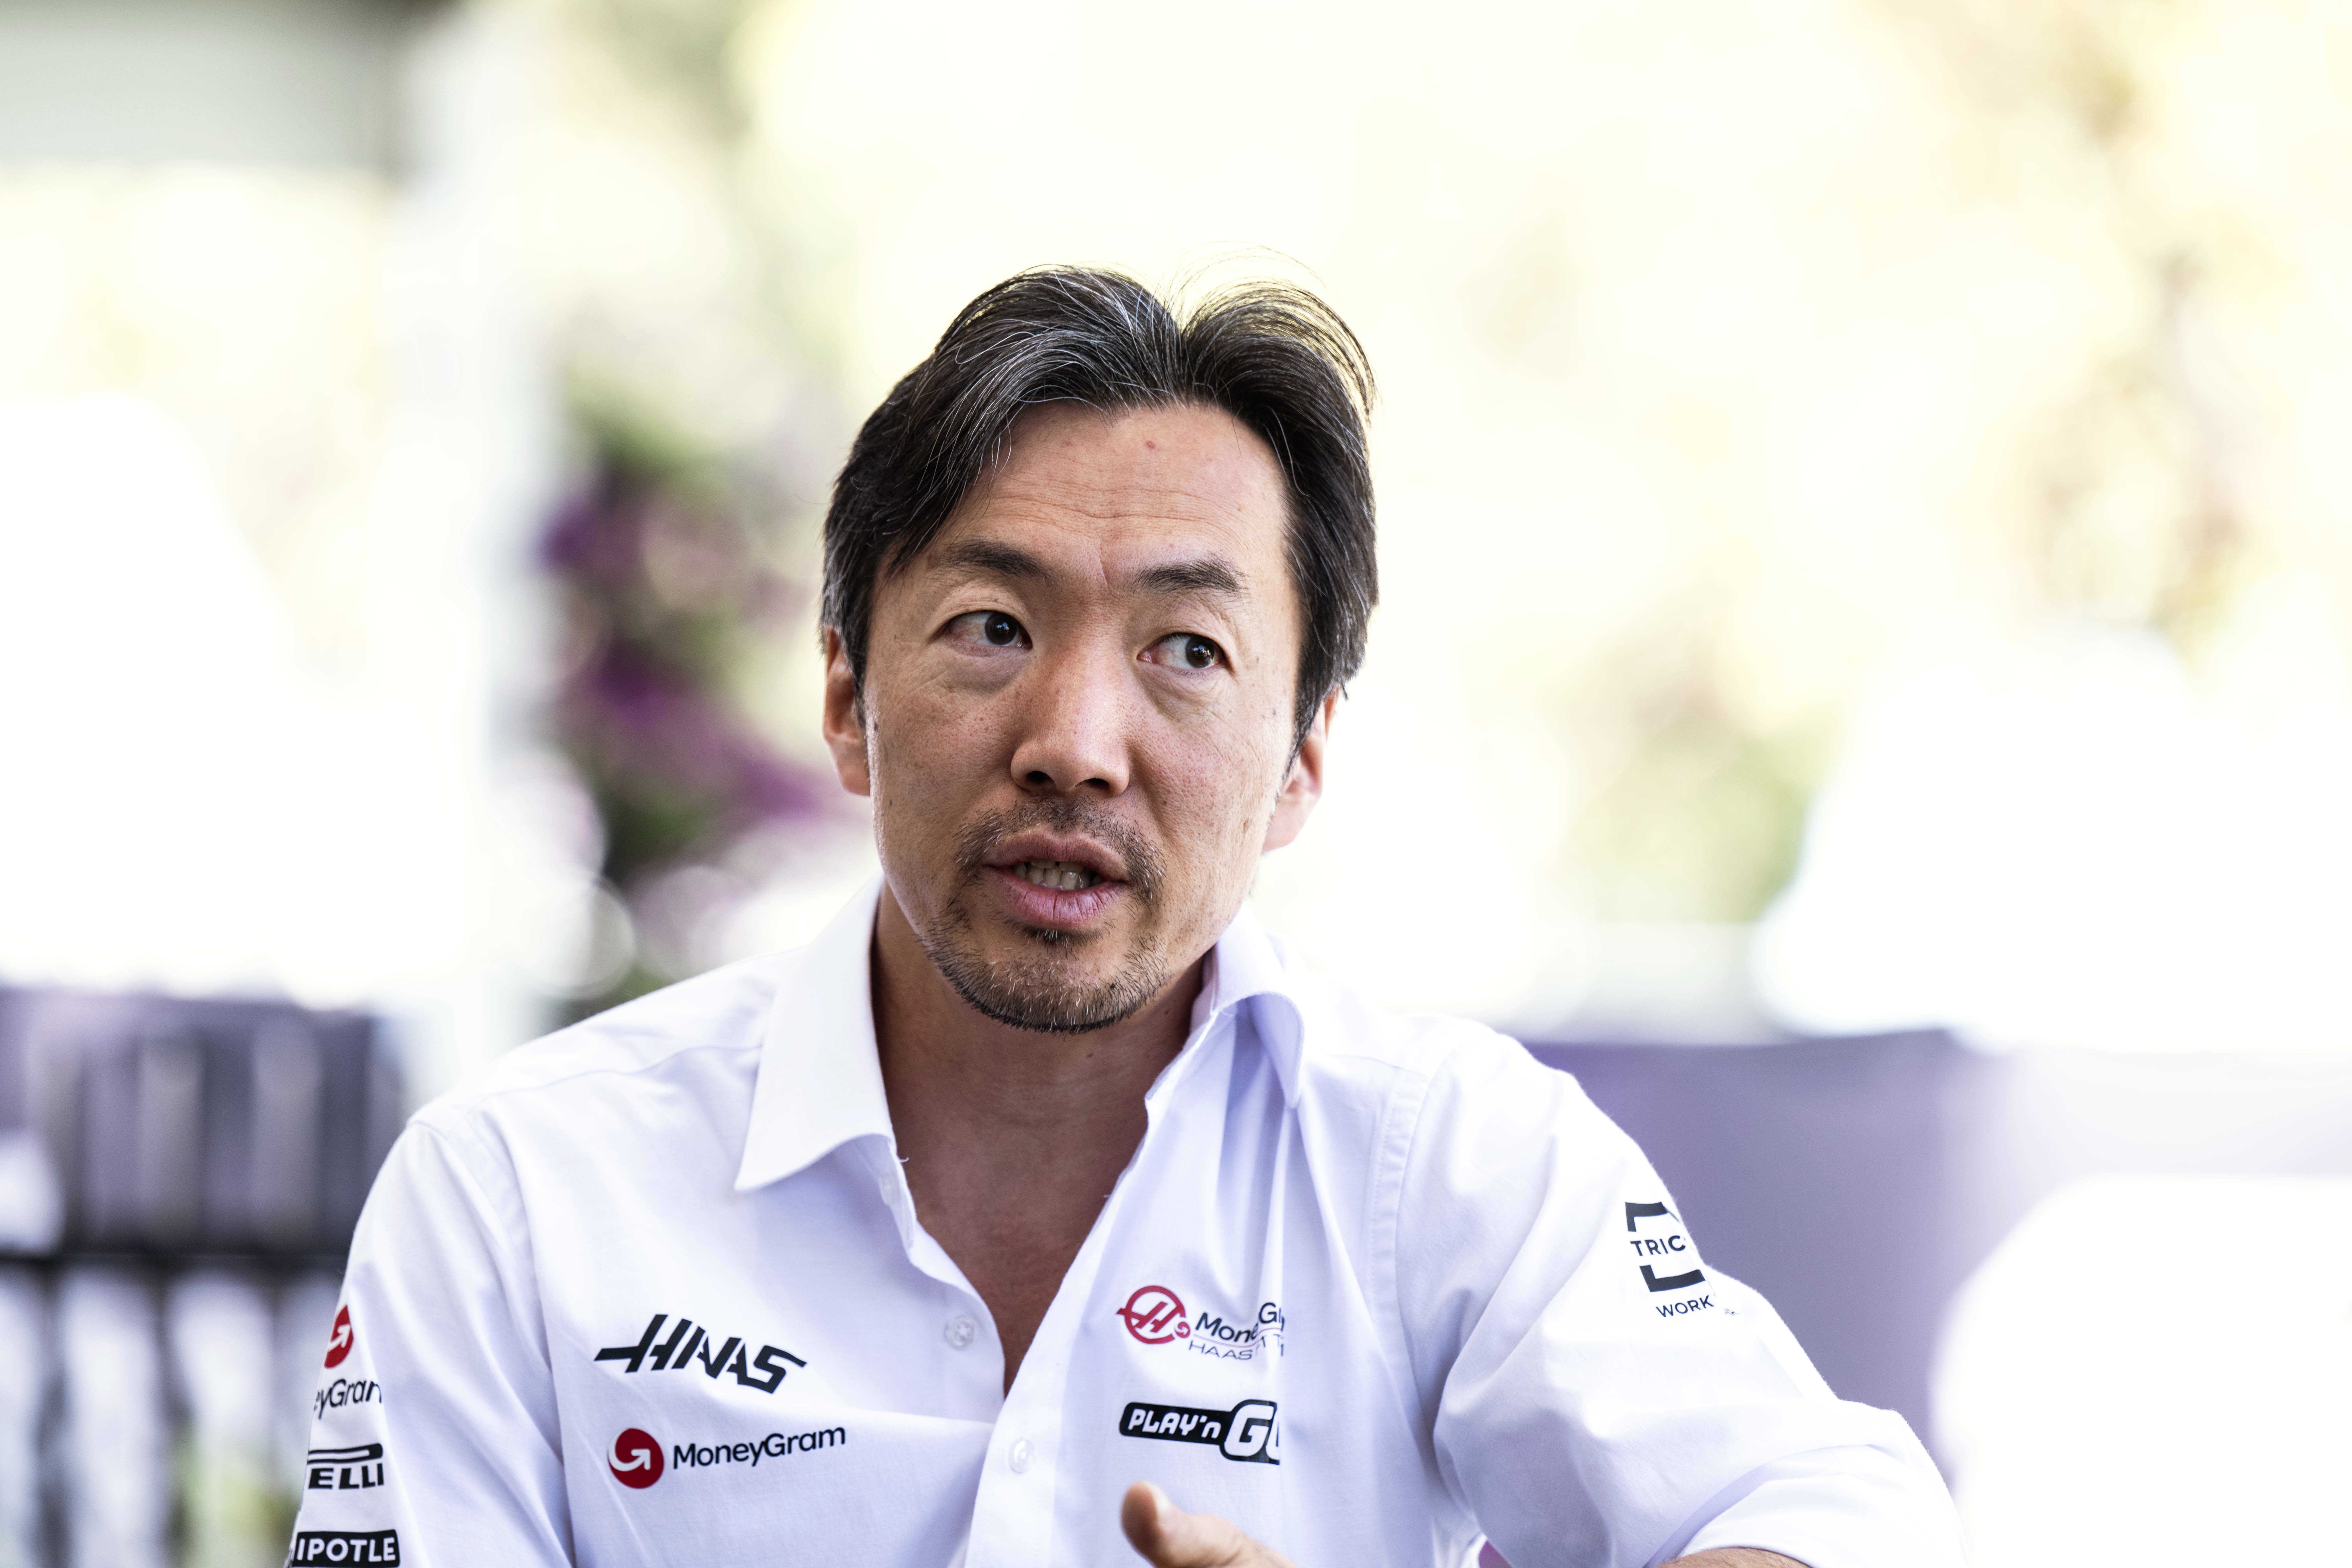 Ayao Komatsu fires back at "complete bull****" Haas criticisms